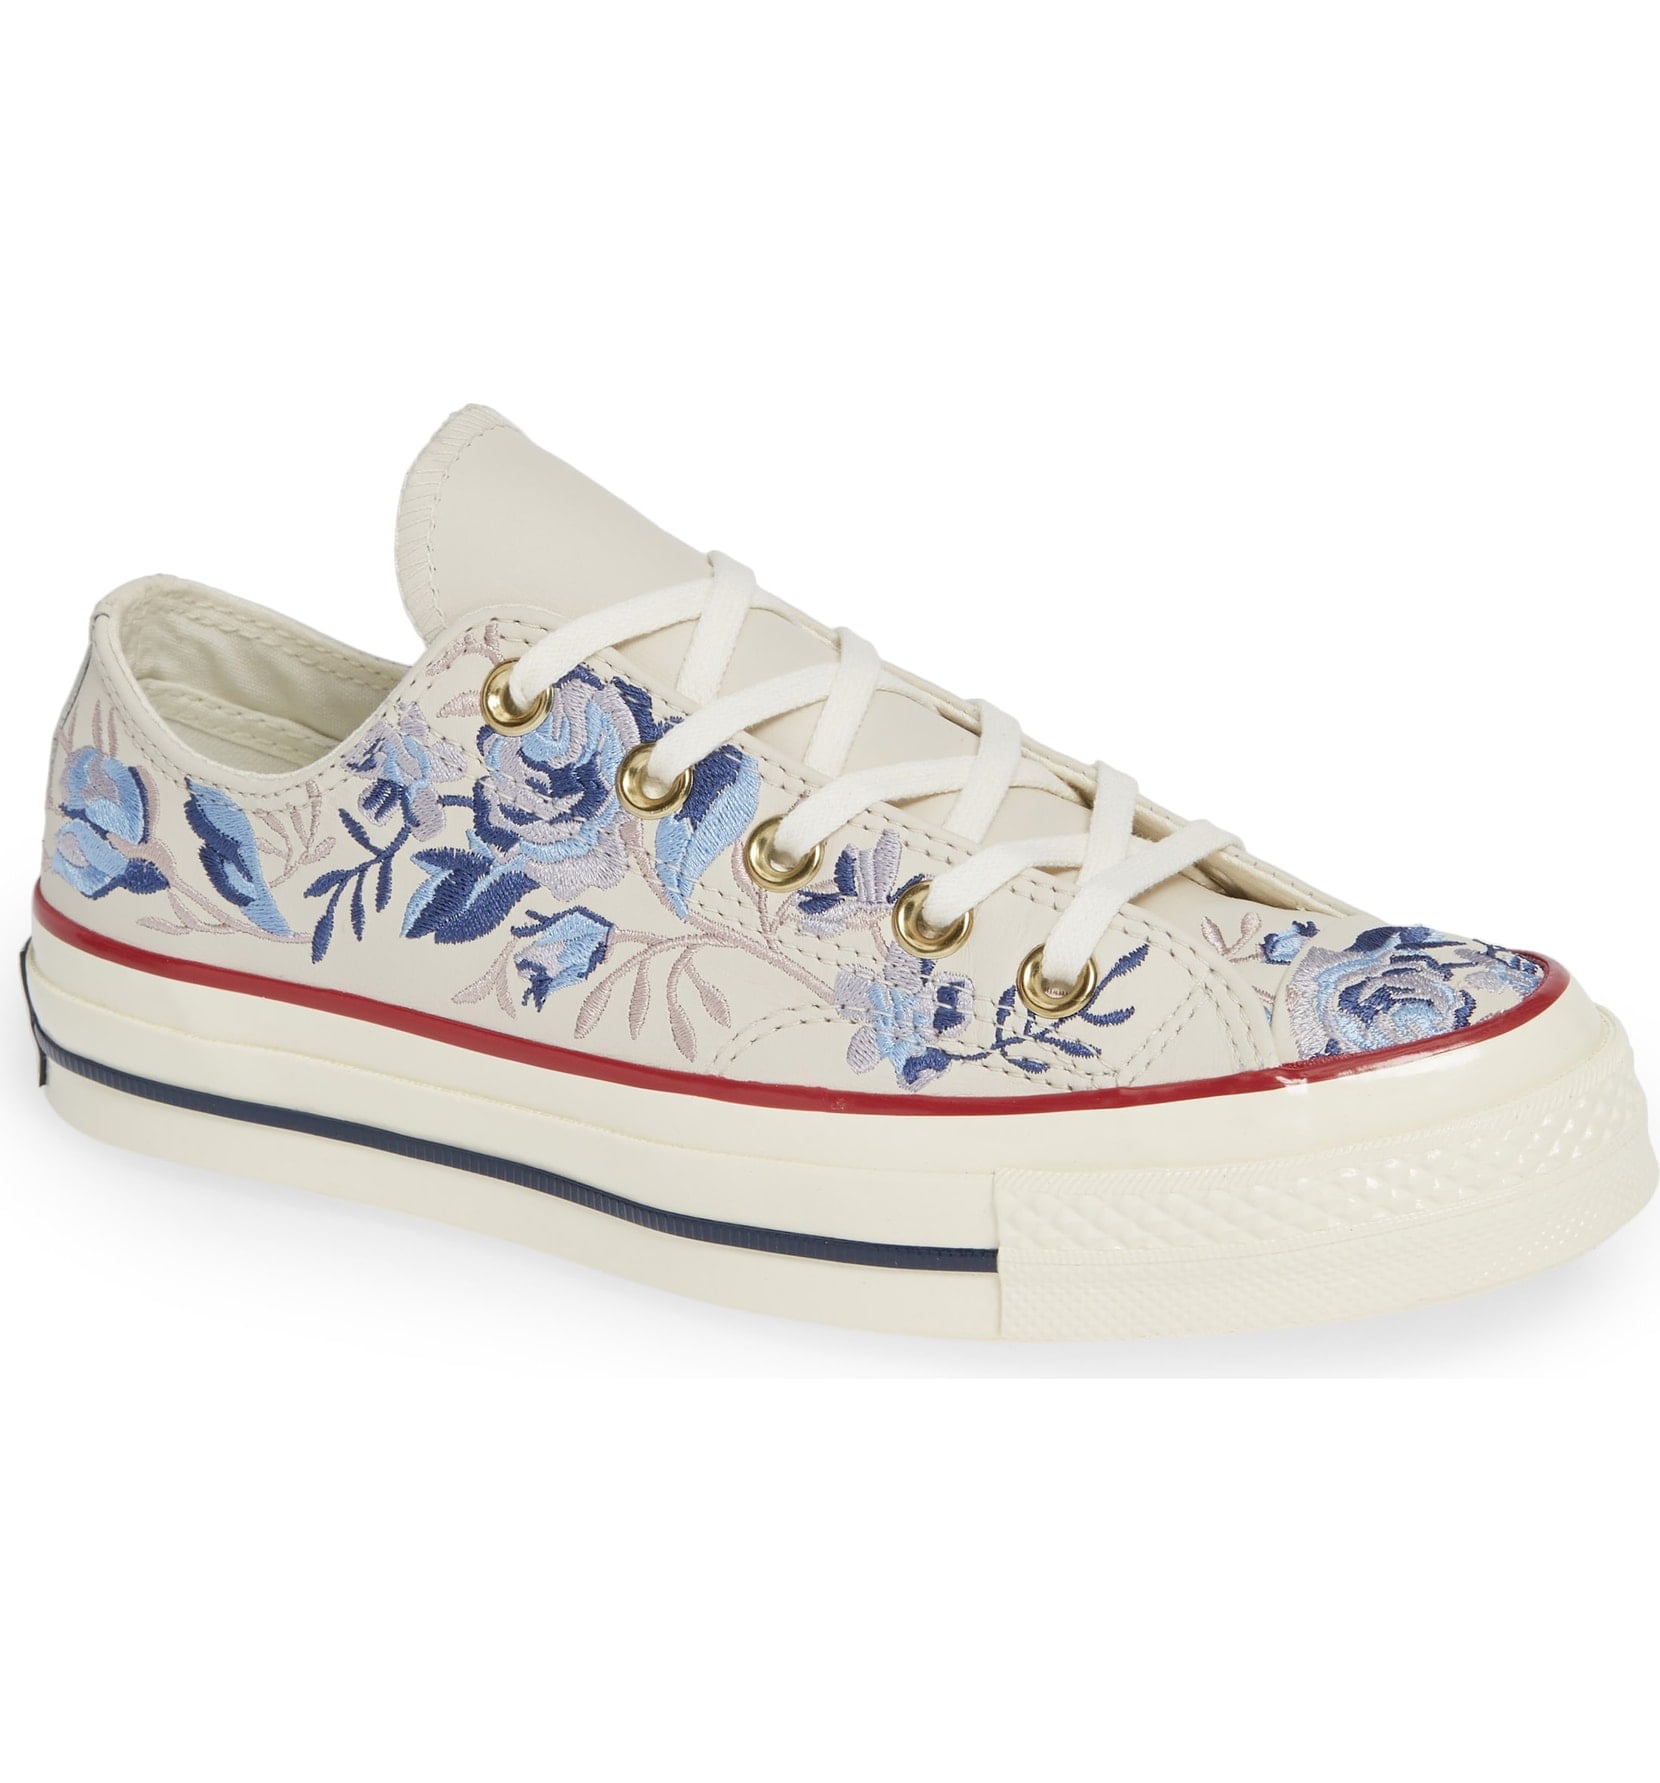 floral converse low tops